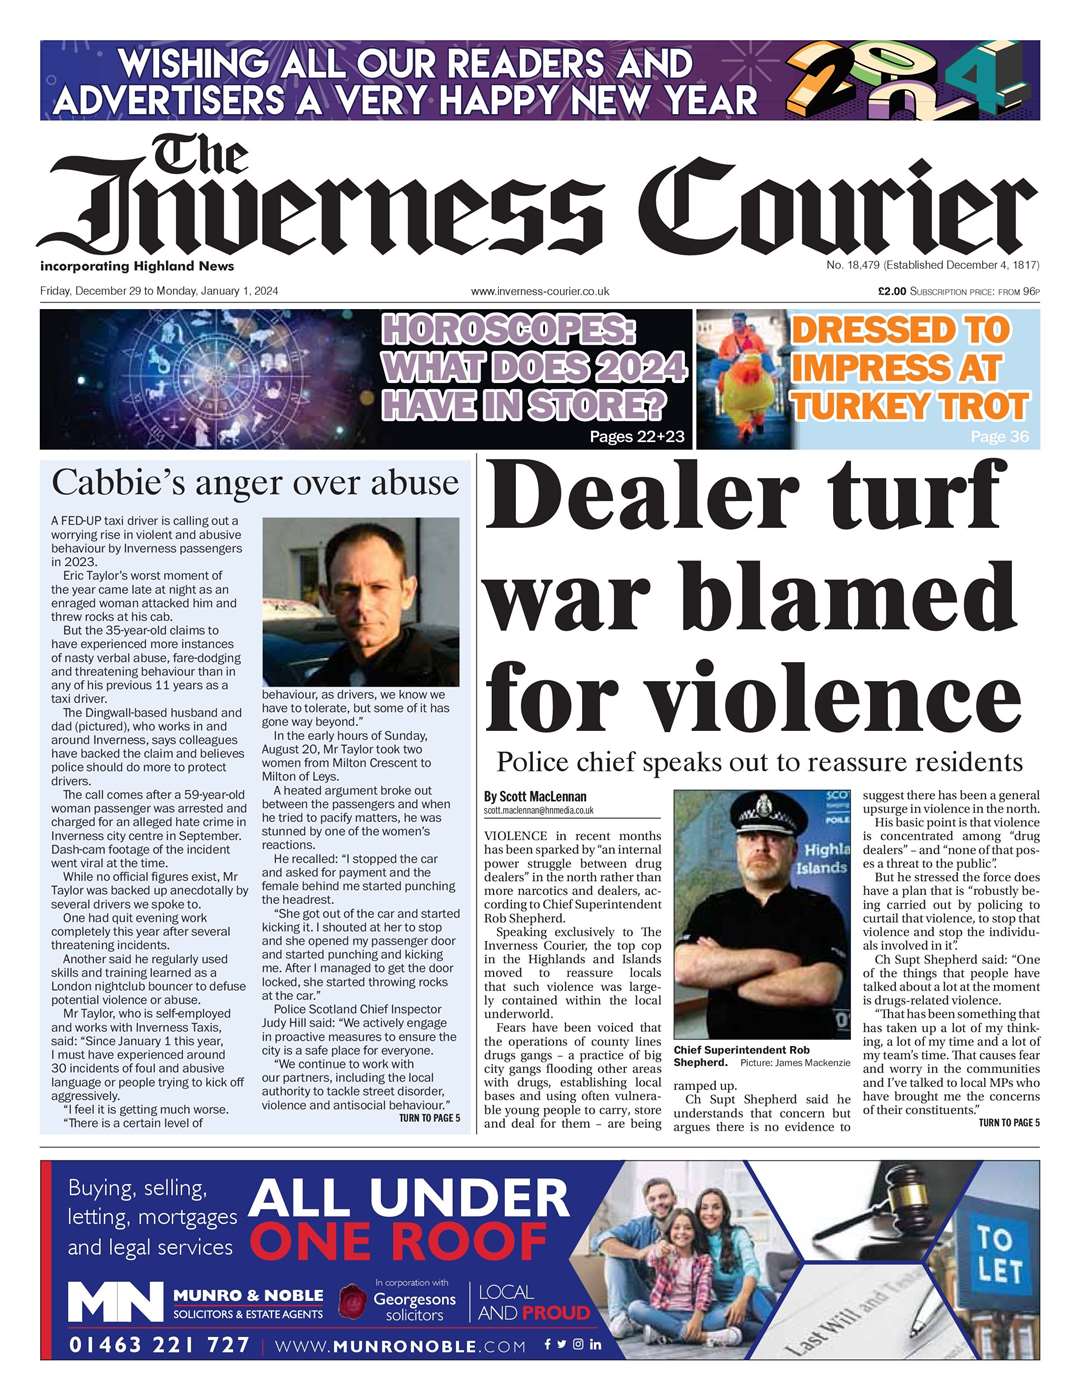 The Inverness Courier, December 29, front page.